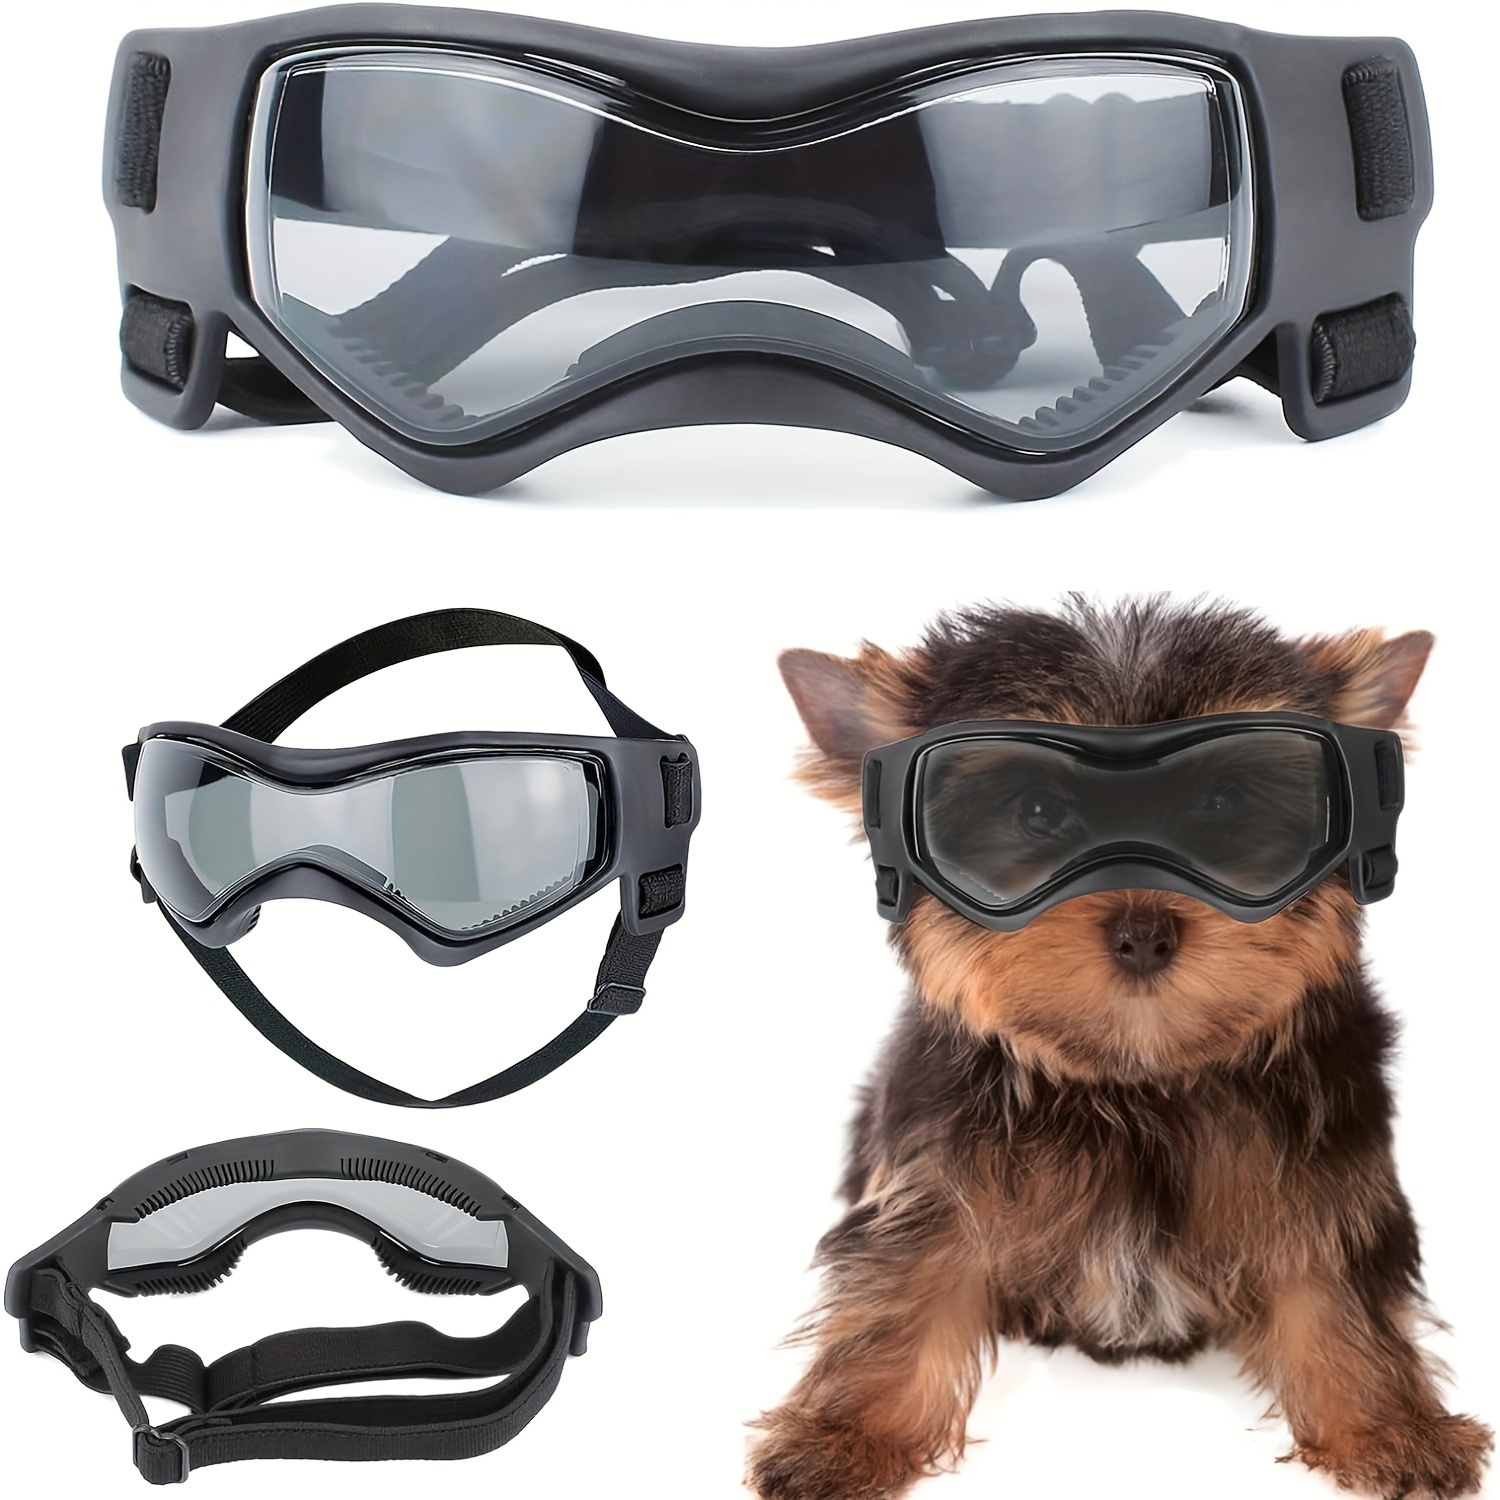 

Small Breed Dog Sunglasses - Uv Protection Goggles For Outdoor Activities, Perfect For Biking And Driving